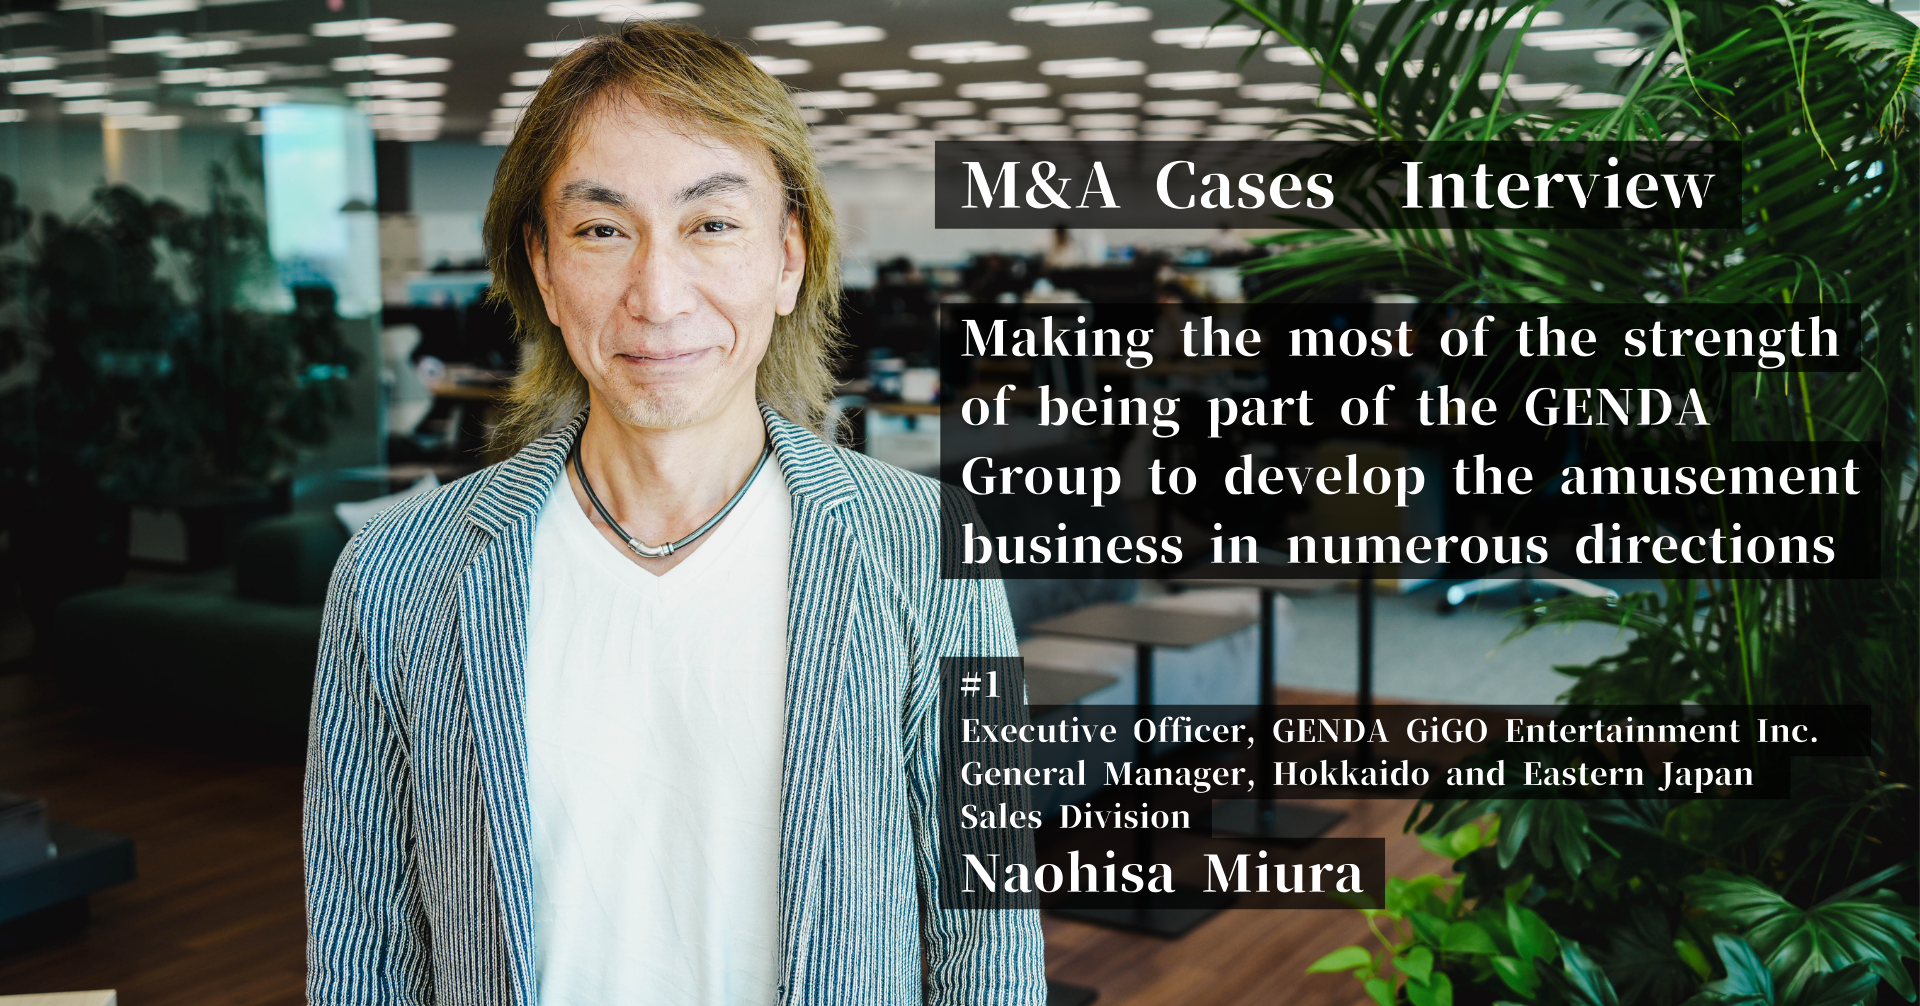 #1 Making the most of the strength of being part of the GENDA Group to develop the amusement business in numerous directions – SUGAI DINOS.